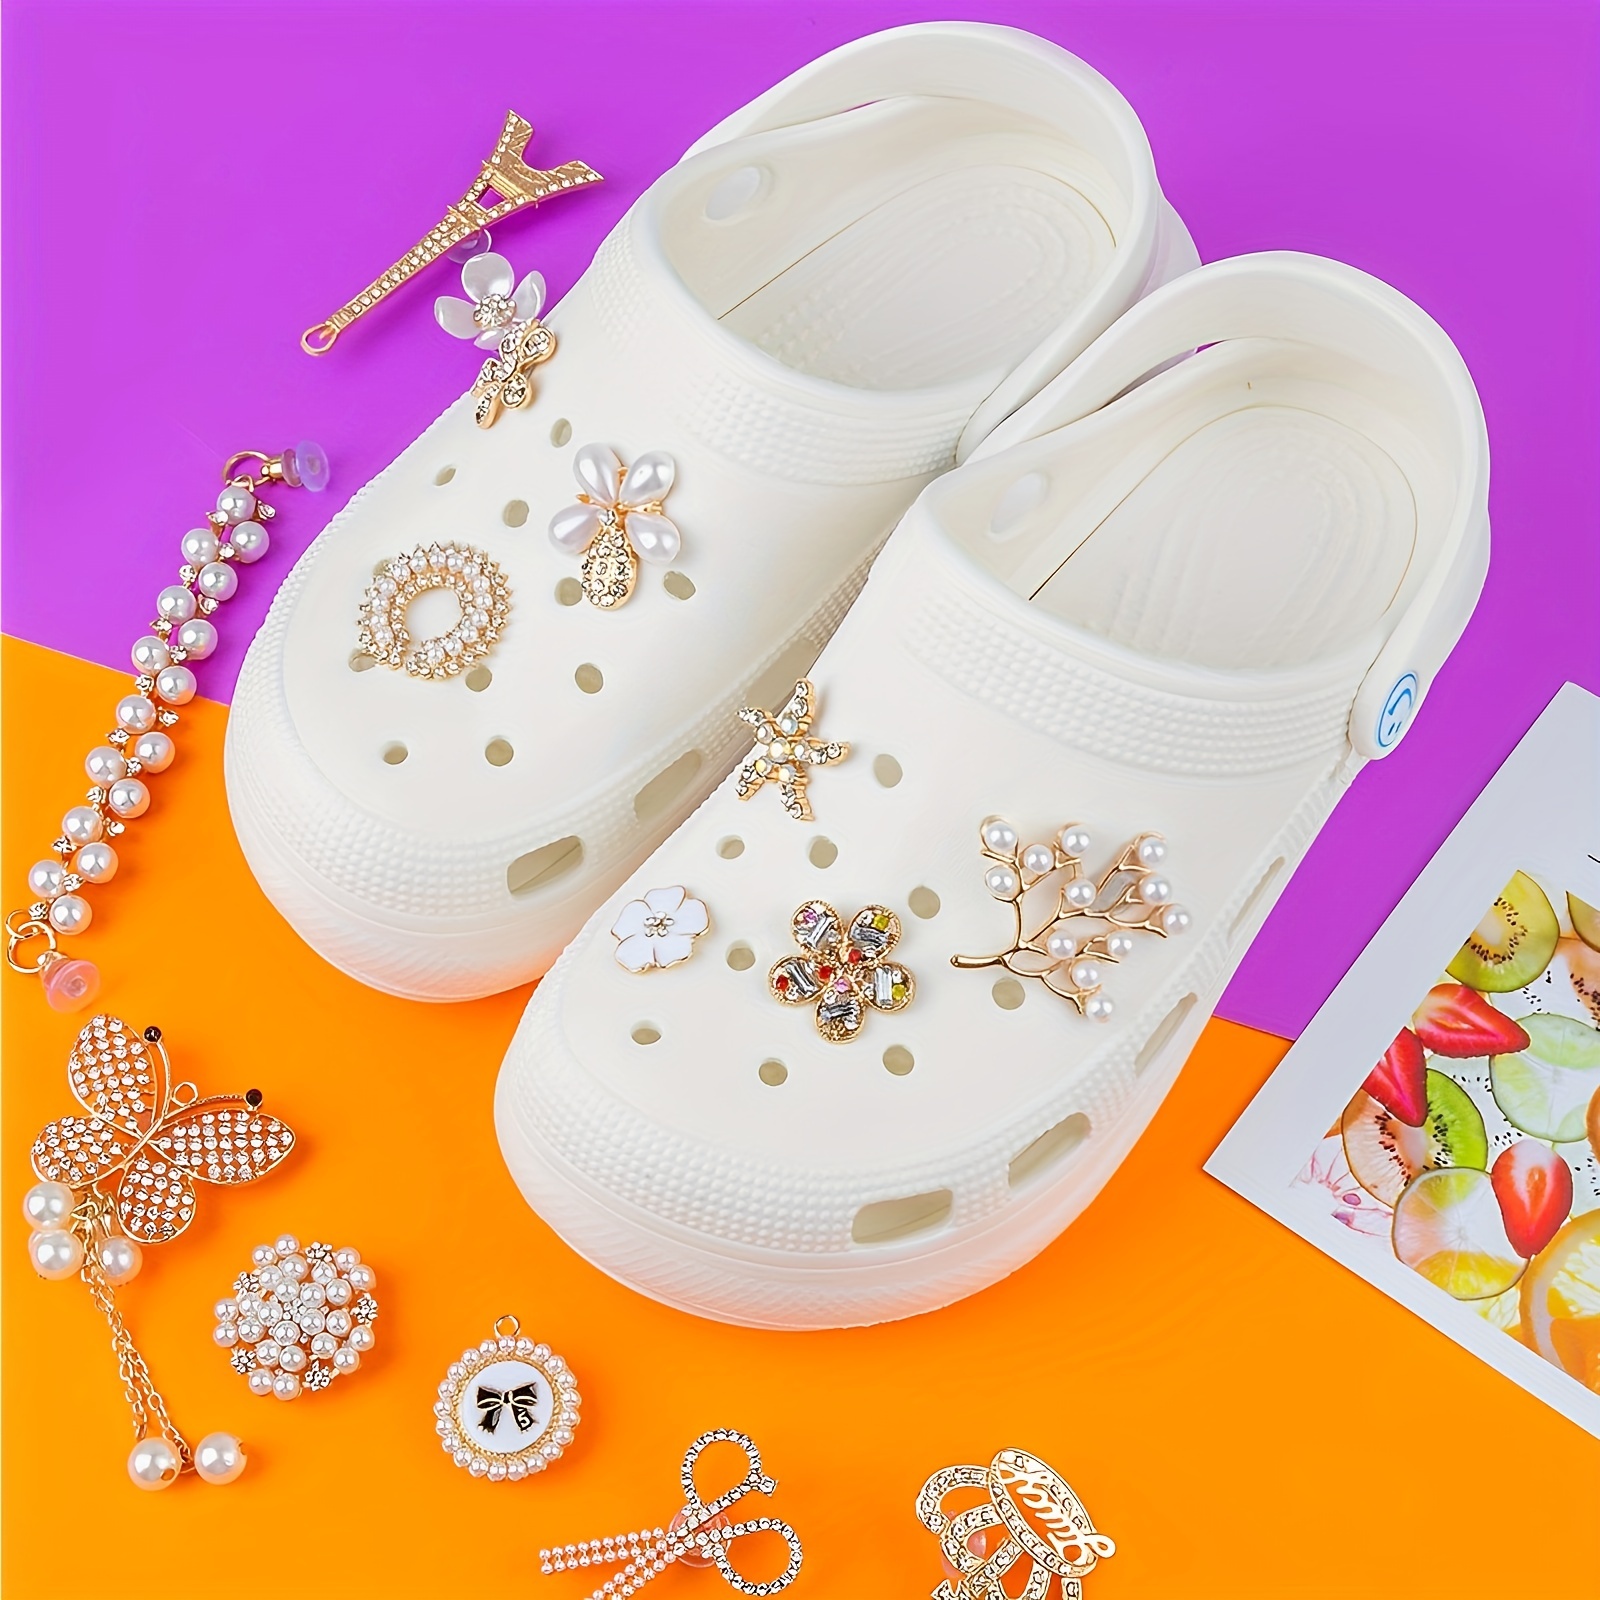 Lixx Pearl Shoe Chain Accessories Cute Shoes Charm 2 Pieces DIY Bling Metal  Chains Acrylic Rhinestone Party Favors Birthday Gifts Clog Sandals Casual